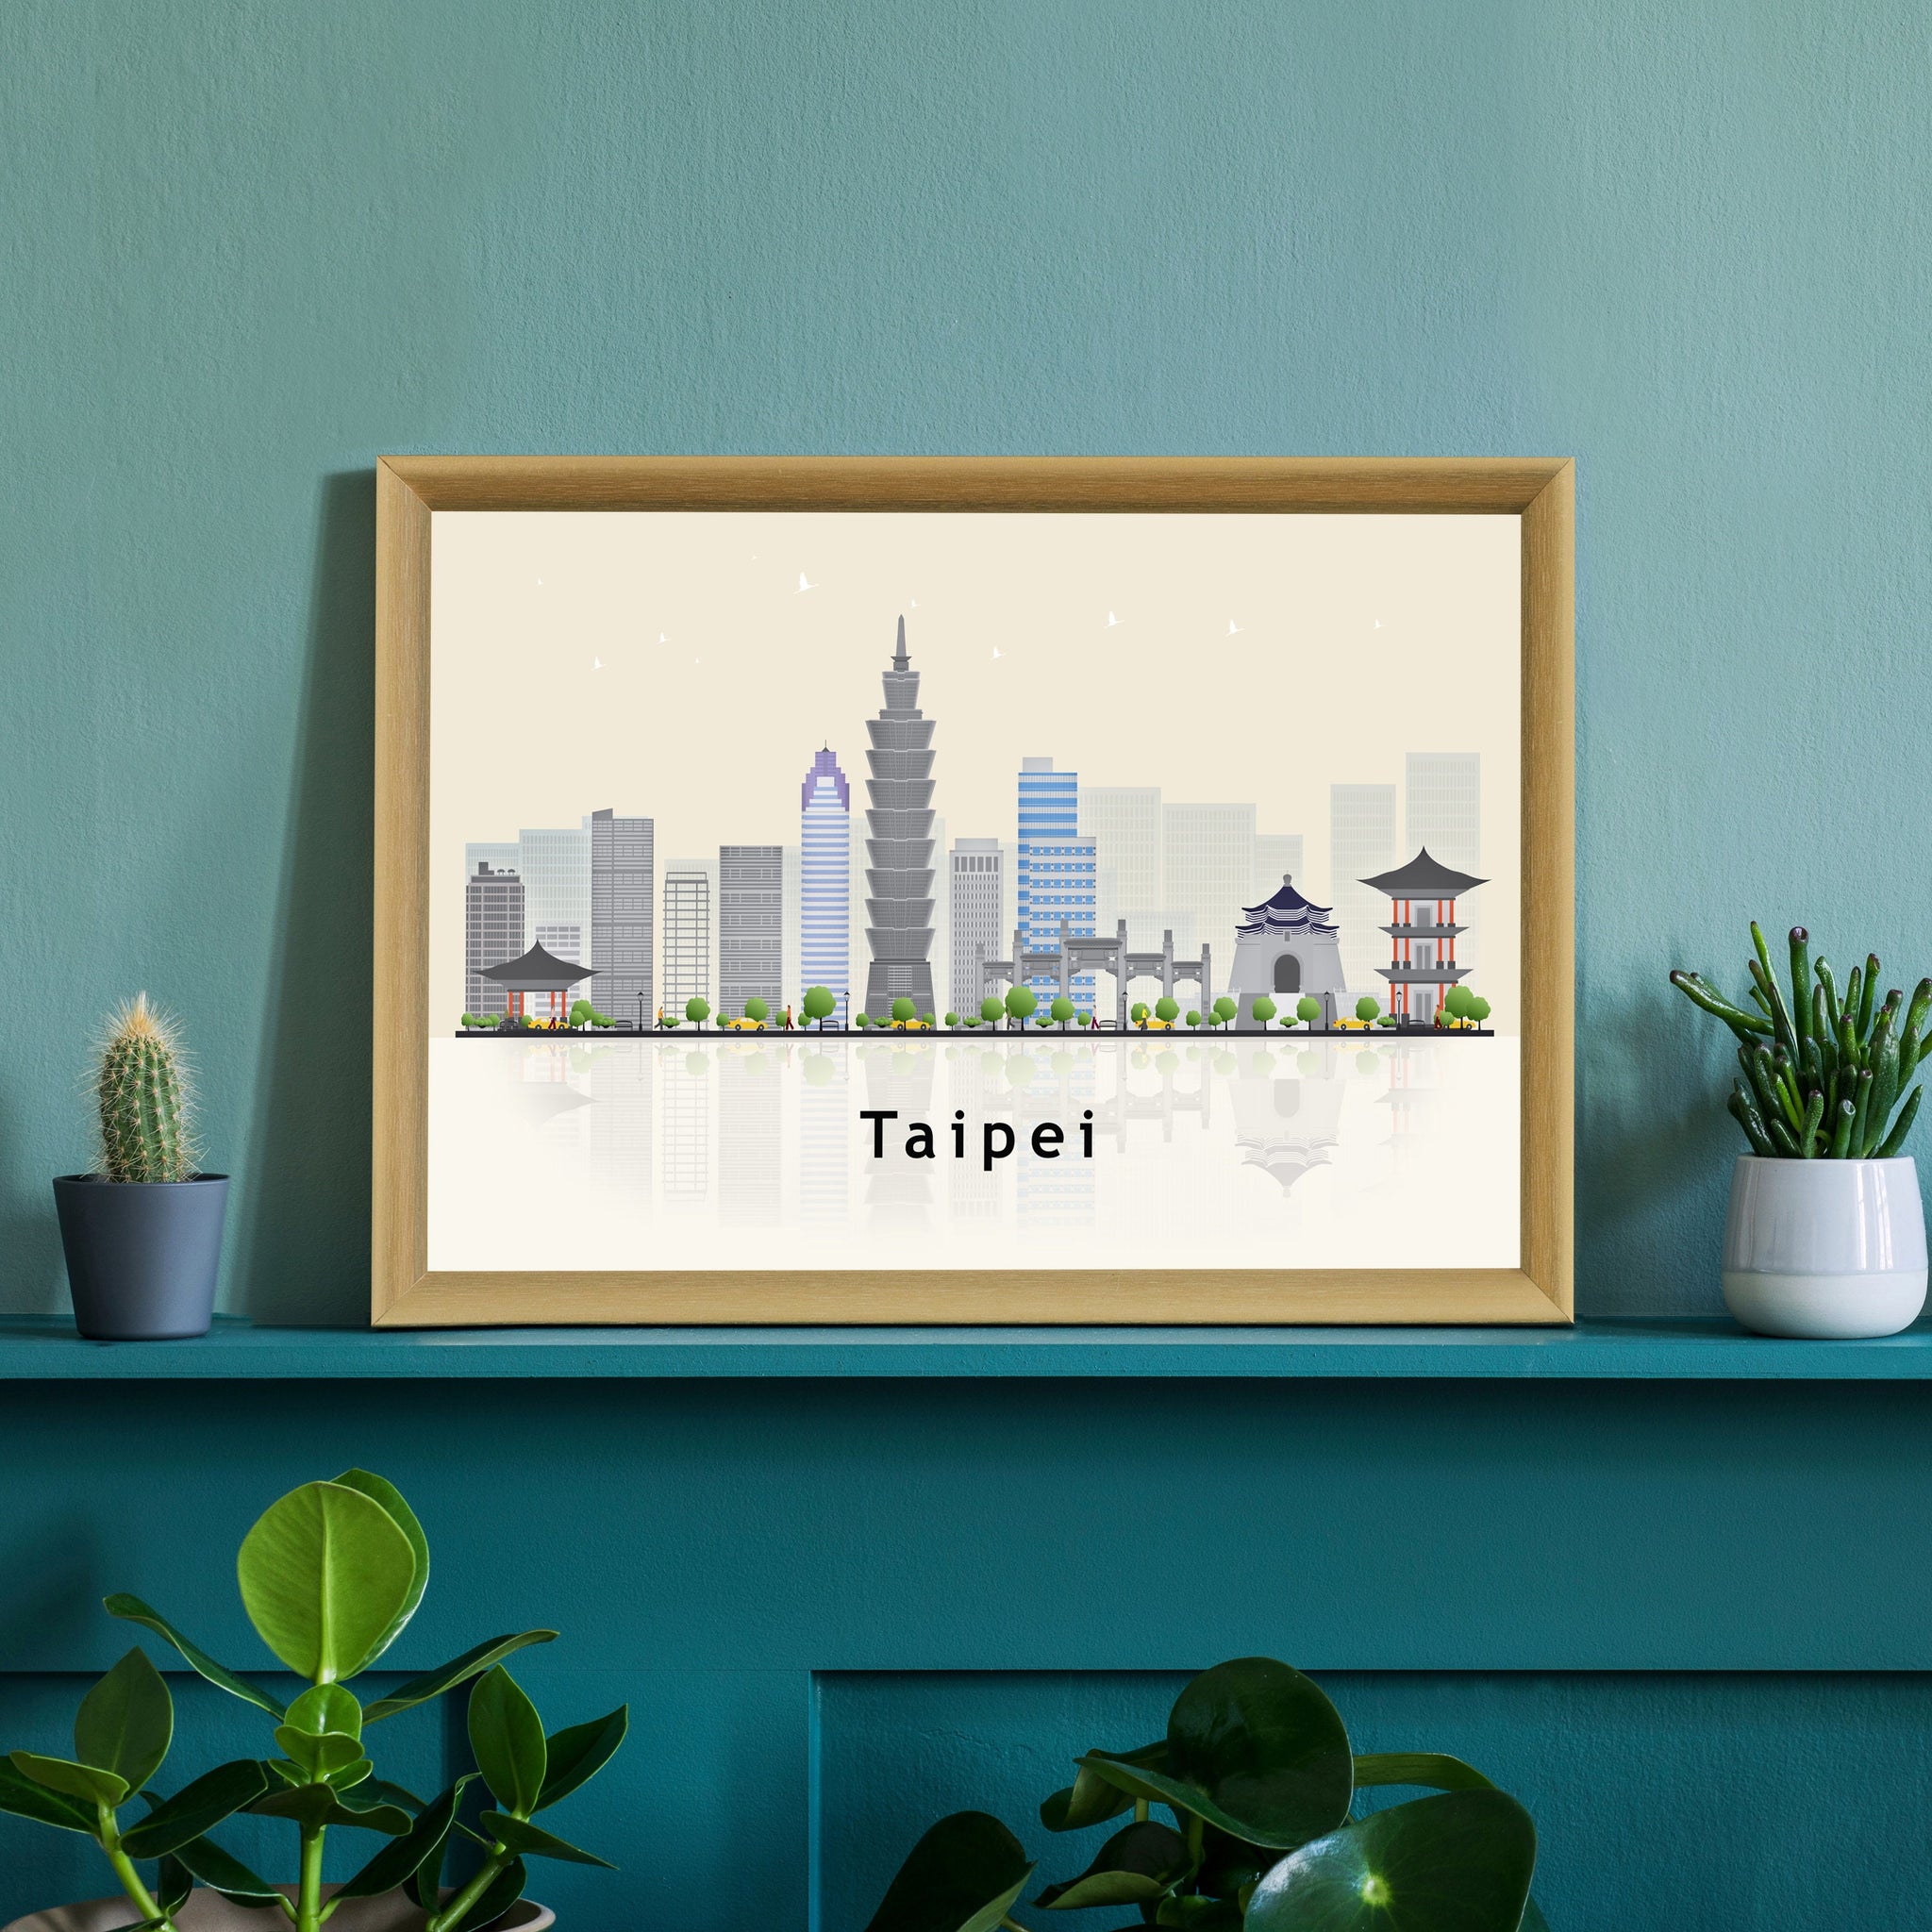 TAIPEI TAIWAN Illustration skyline poster, Modern skyline cityscape poster, Taipei city skyline landmark map poster, Home wall decorations